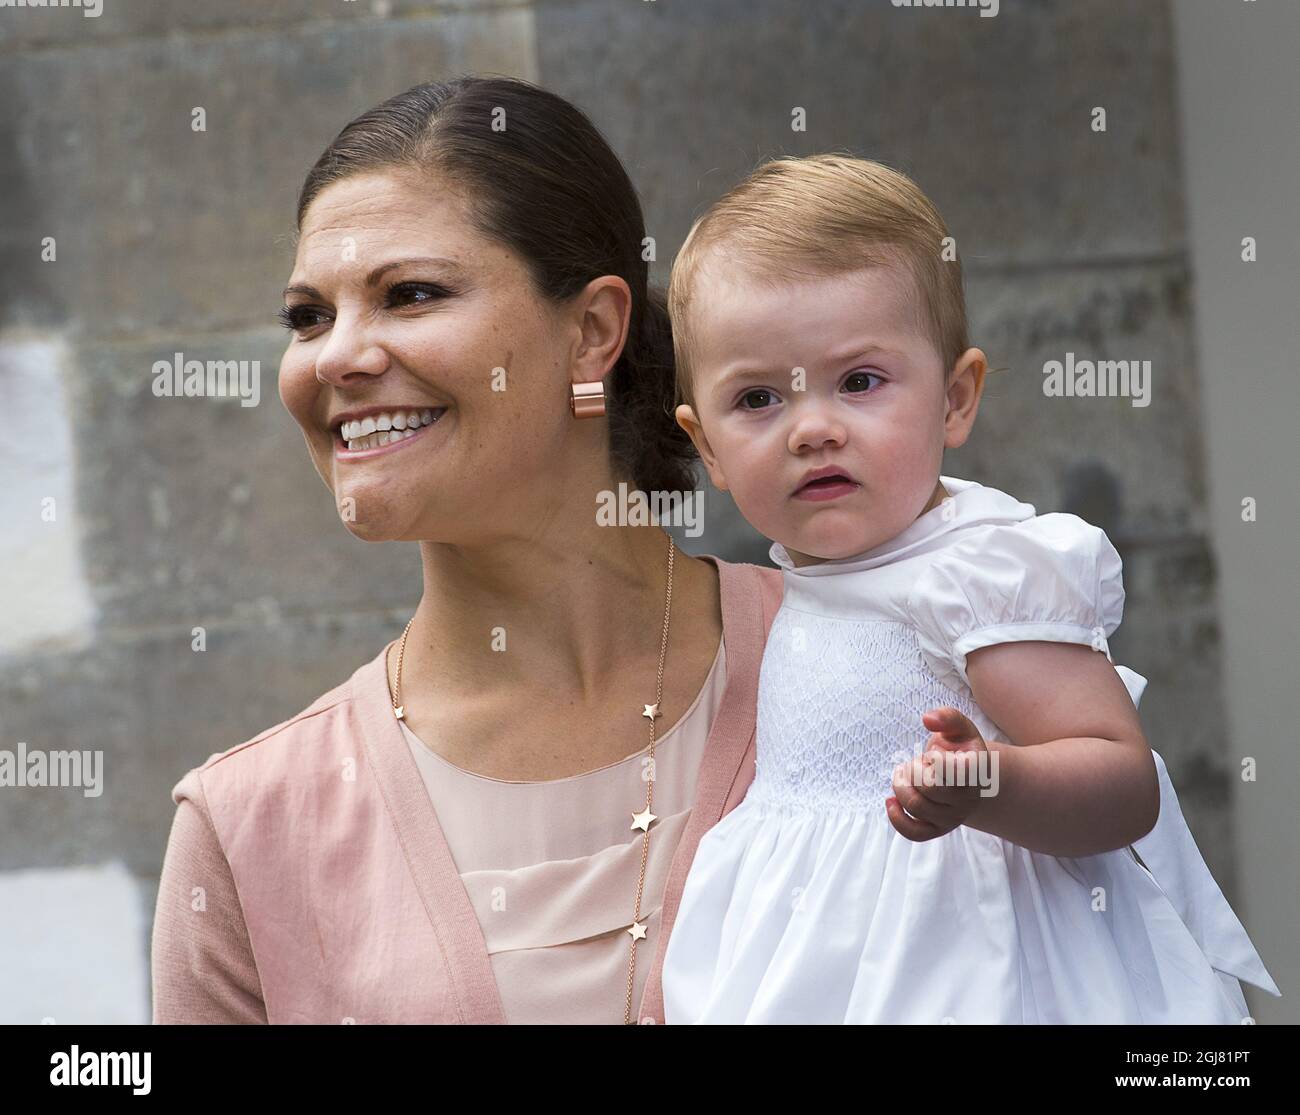 BORGHOLM 20130714 Swedish Crown Princess Victoria and her daughter Princesse Estelle, at the courtyard of the royal family's summer residence Solliden, on the island of Oeland, Sweden, on July 14, 2012, during the celebrations of Crown Princess Victorias 36th birthday. Photo: Jonas Ekstromer / SCANPIX / code 610030  Stock Photo